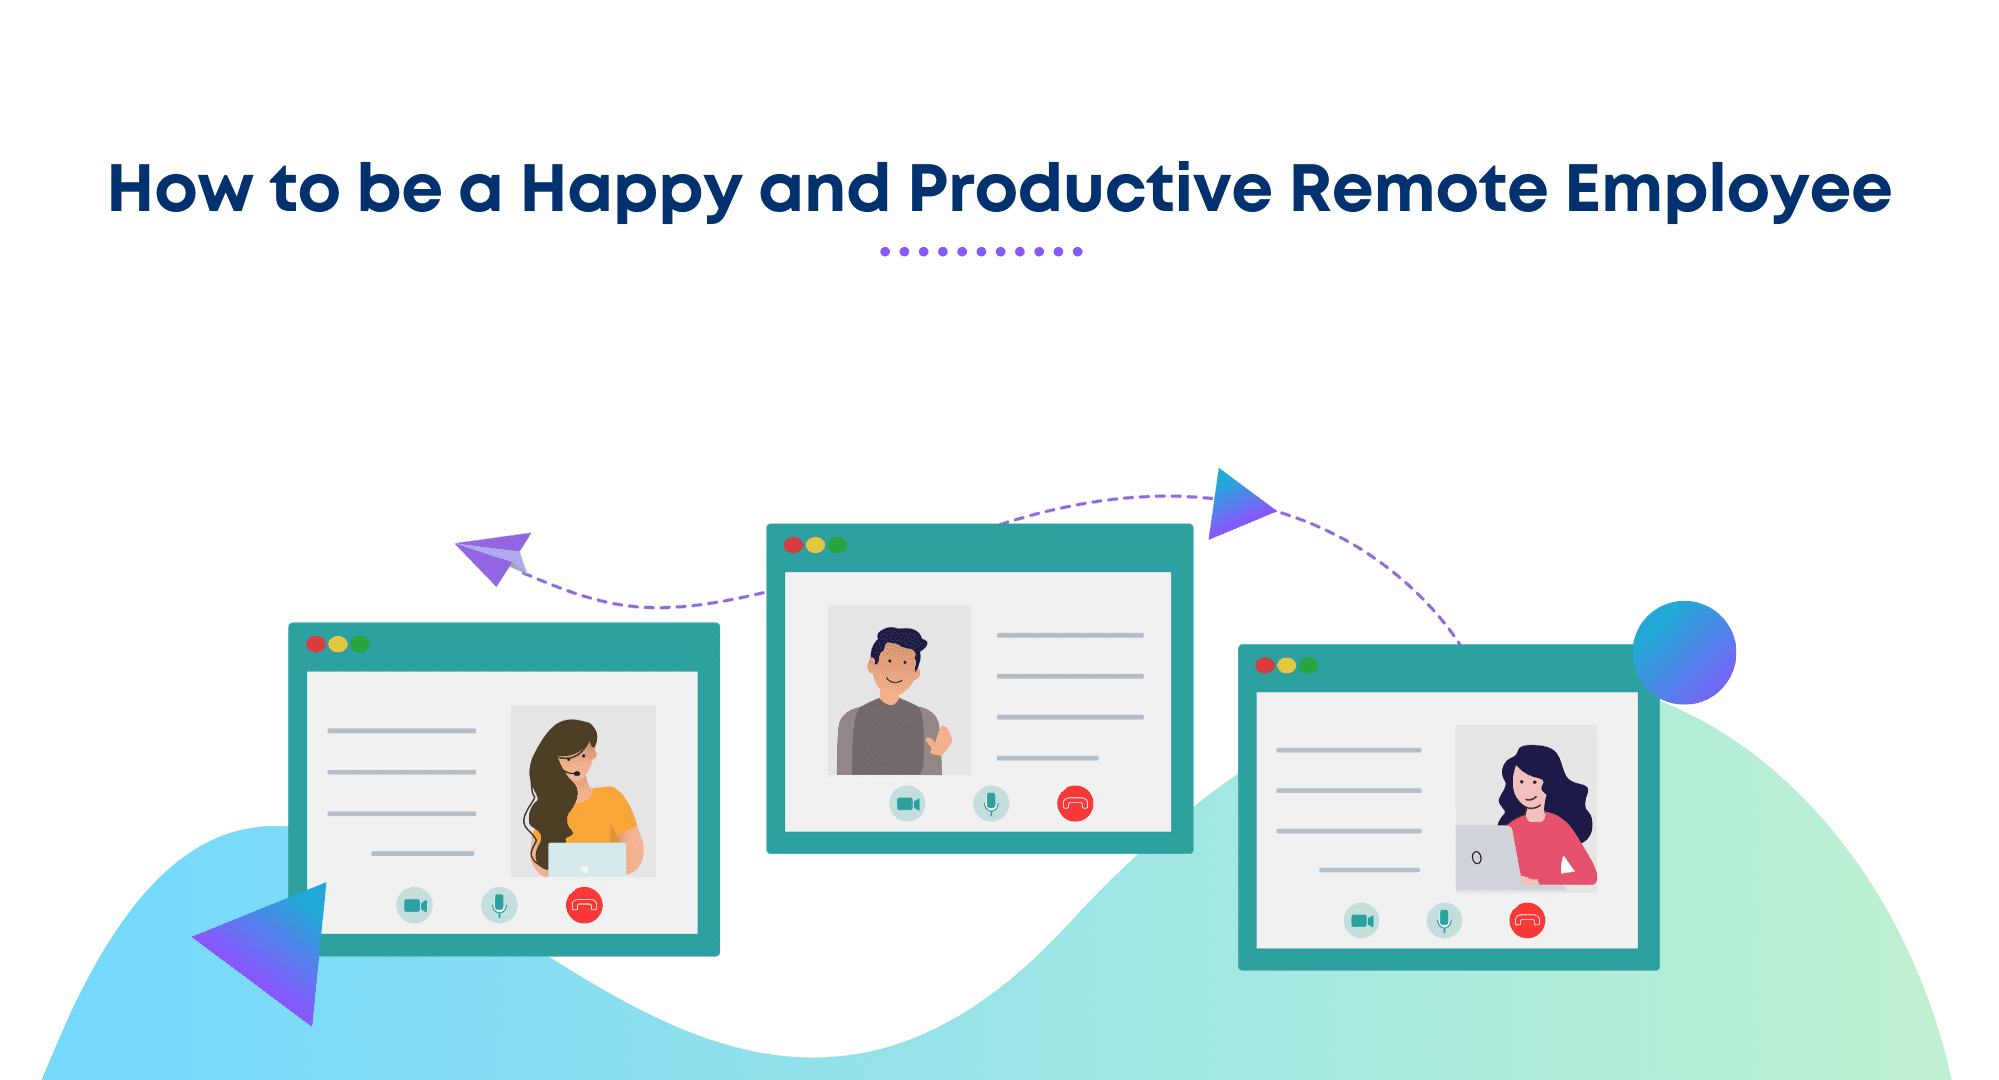 How to be a happy and productive remote employee. Tips to be a happy and productive remote worker. How to manage remote work during COVID 19.